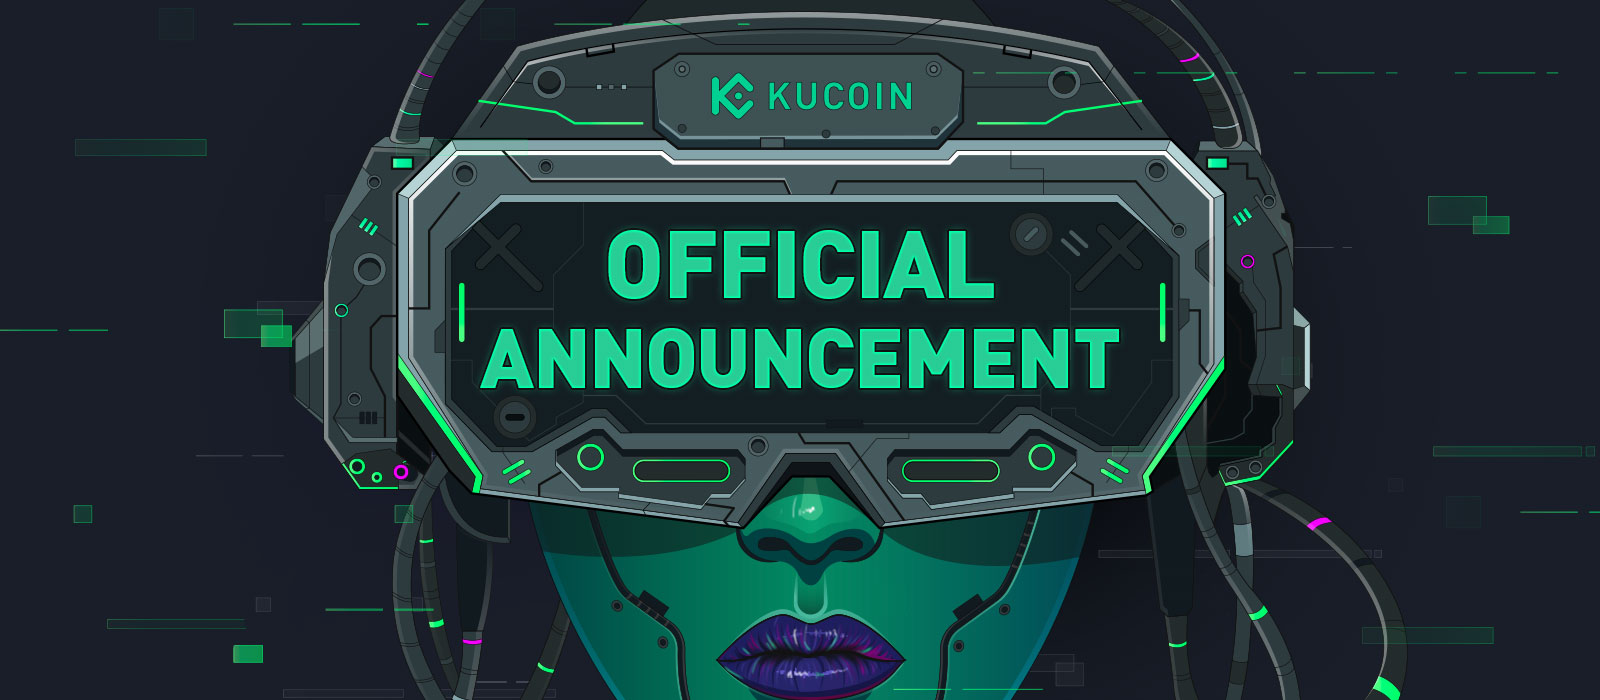 What is the Kucoin KCS Bonus and how to participate?